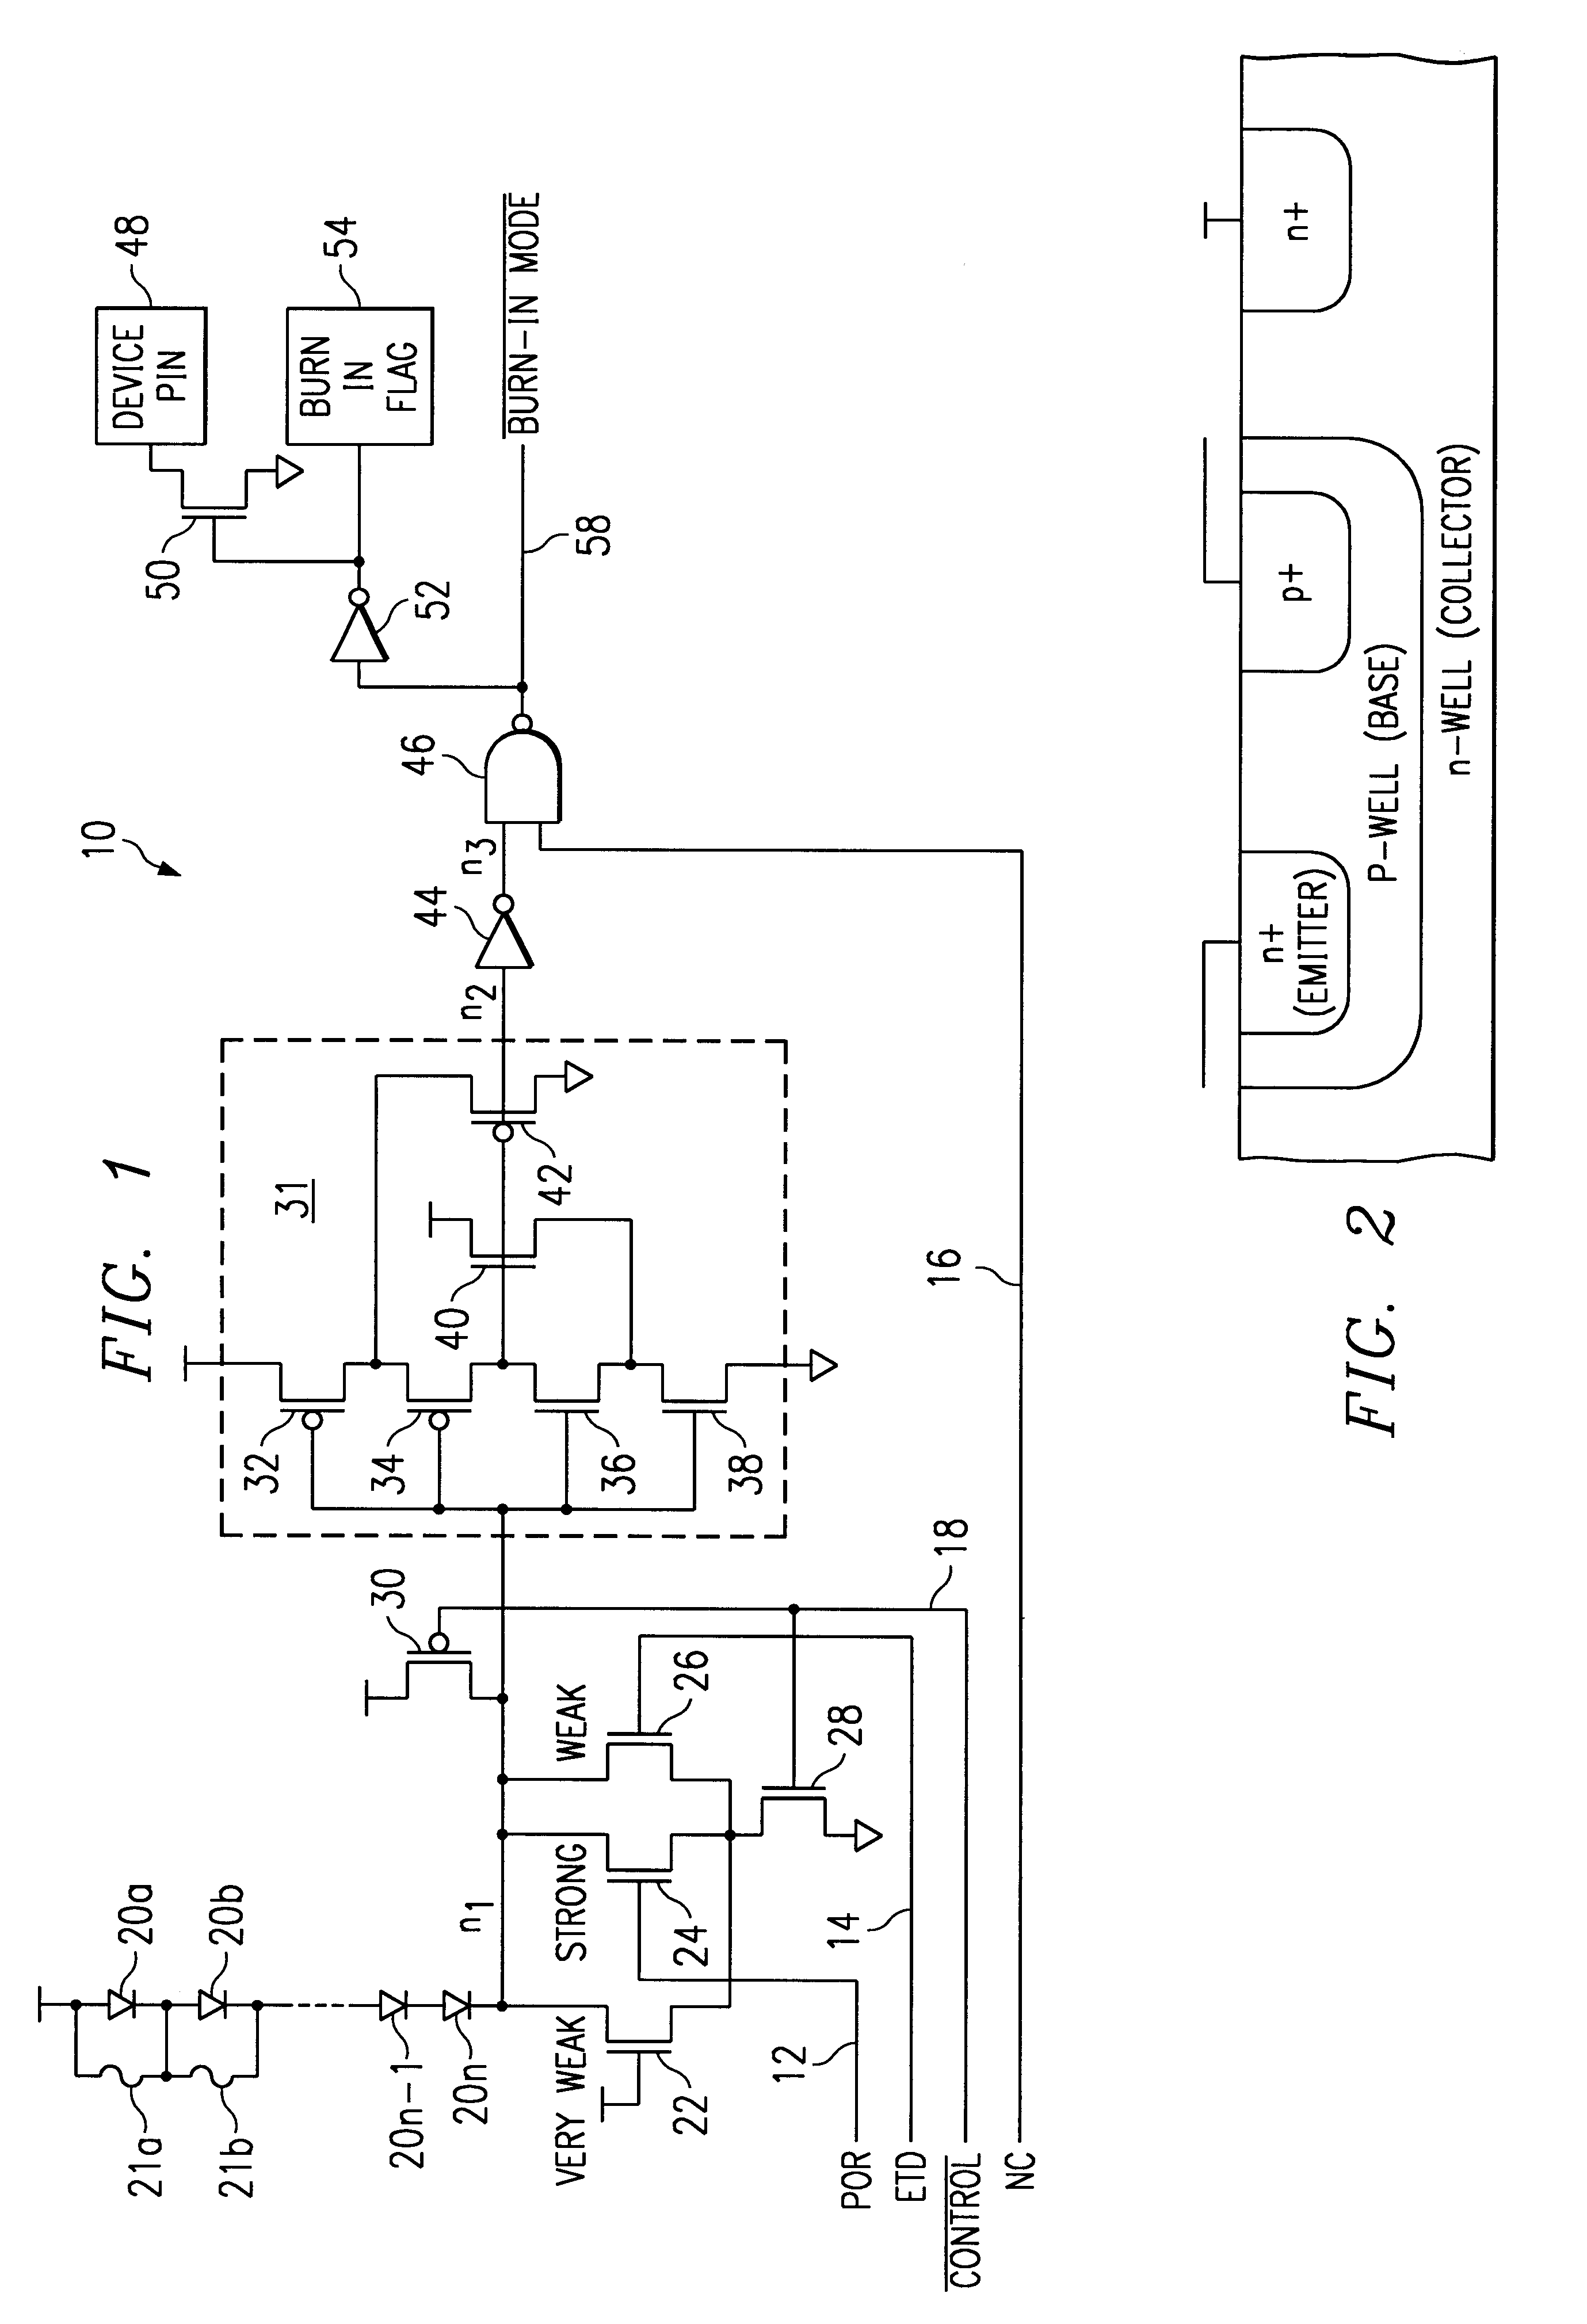 Integrated circuit device having a burn-in mode for which entry into and exit from can be controlled